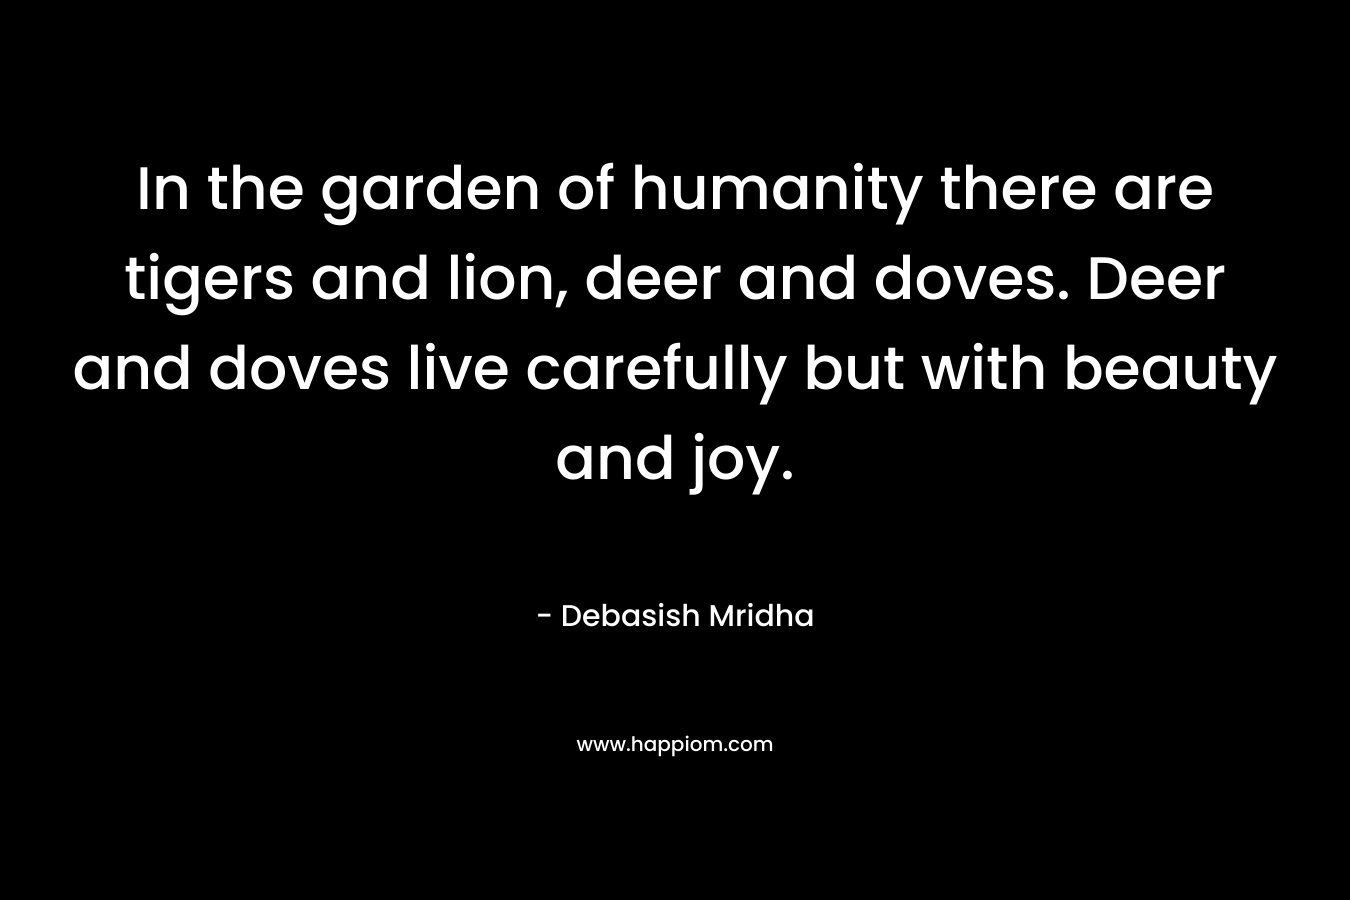 In the garden of humanity there are tigers and lion, deer and doves. Deer and doves live carefully but with beauty and joy. – Debasish Mridha